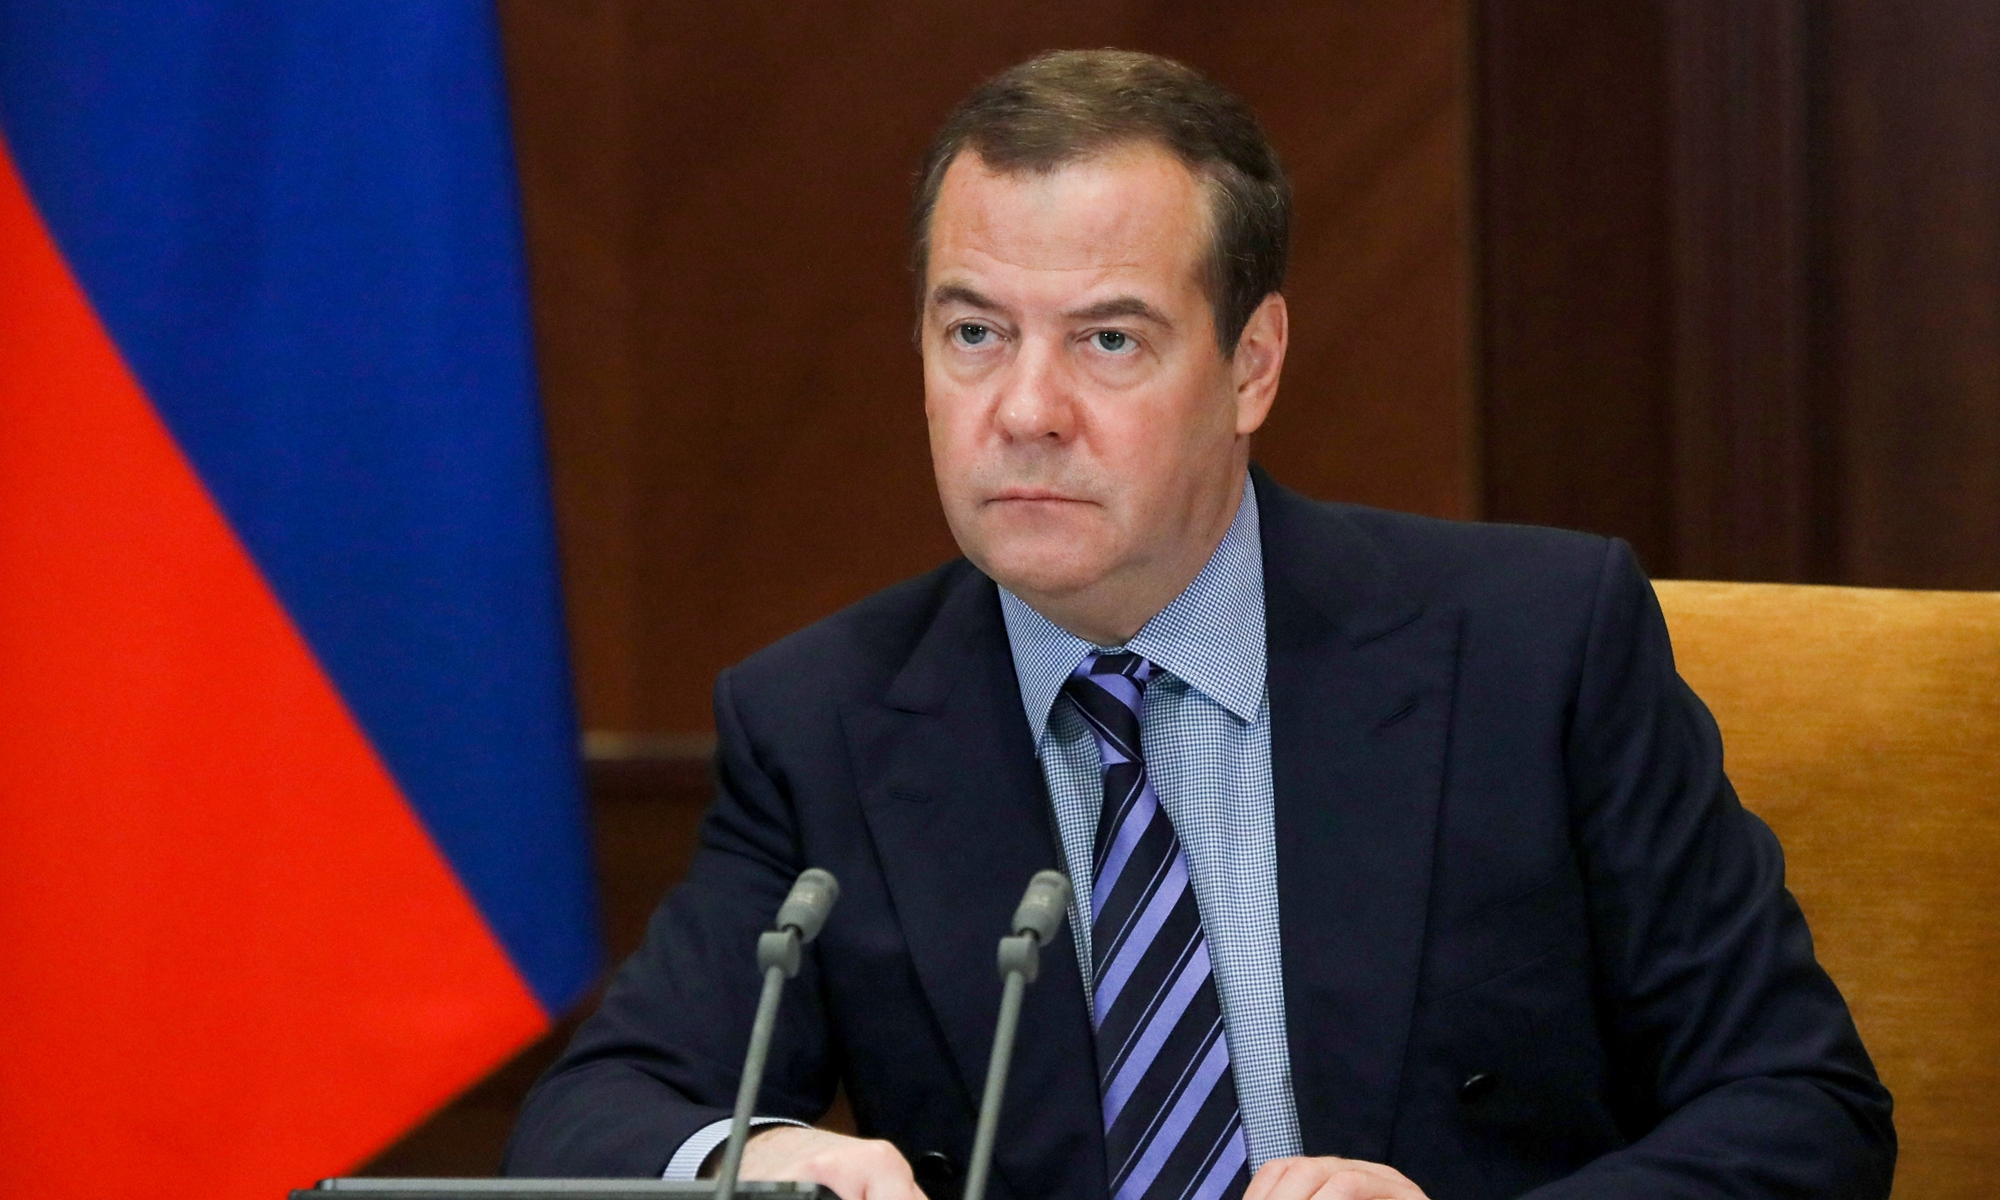 Deputy Chairman of the Russian Security Council Dmitry Medvedev Photo:VCG